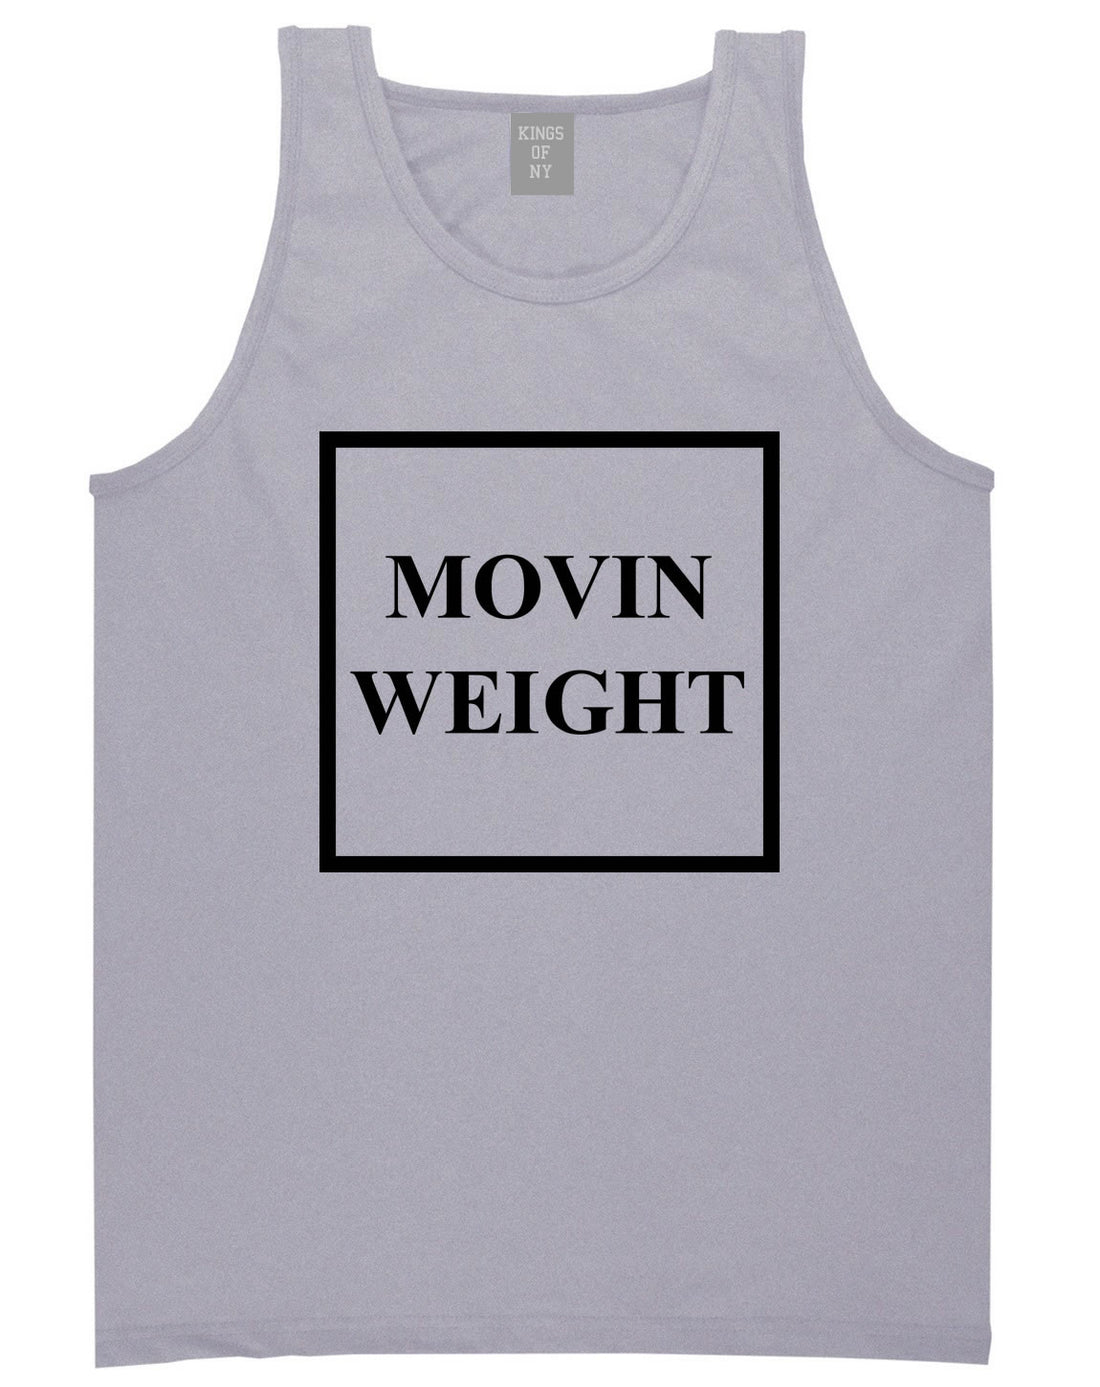 Movin Weight Hustler Tank Top in Grey by Kings Of NY